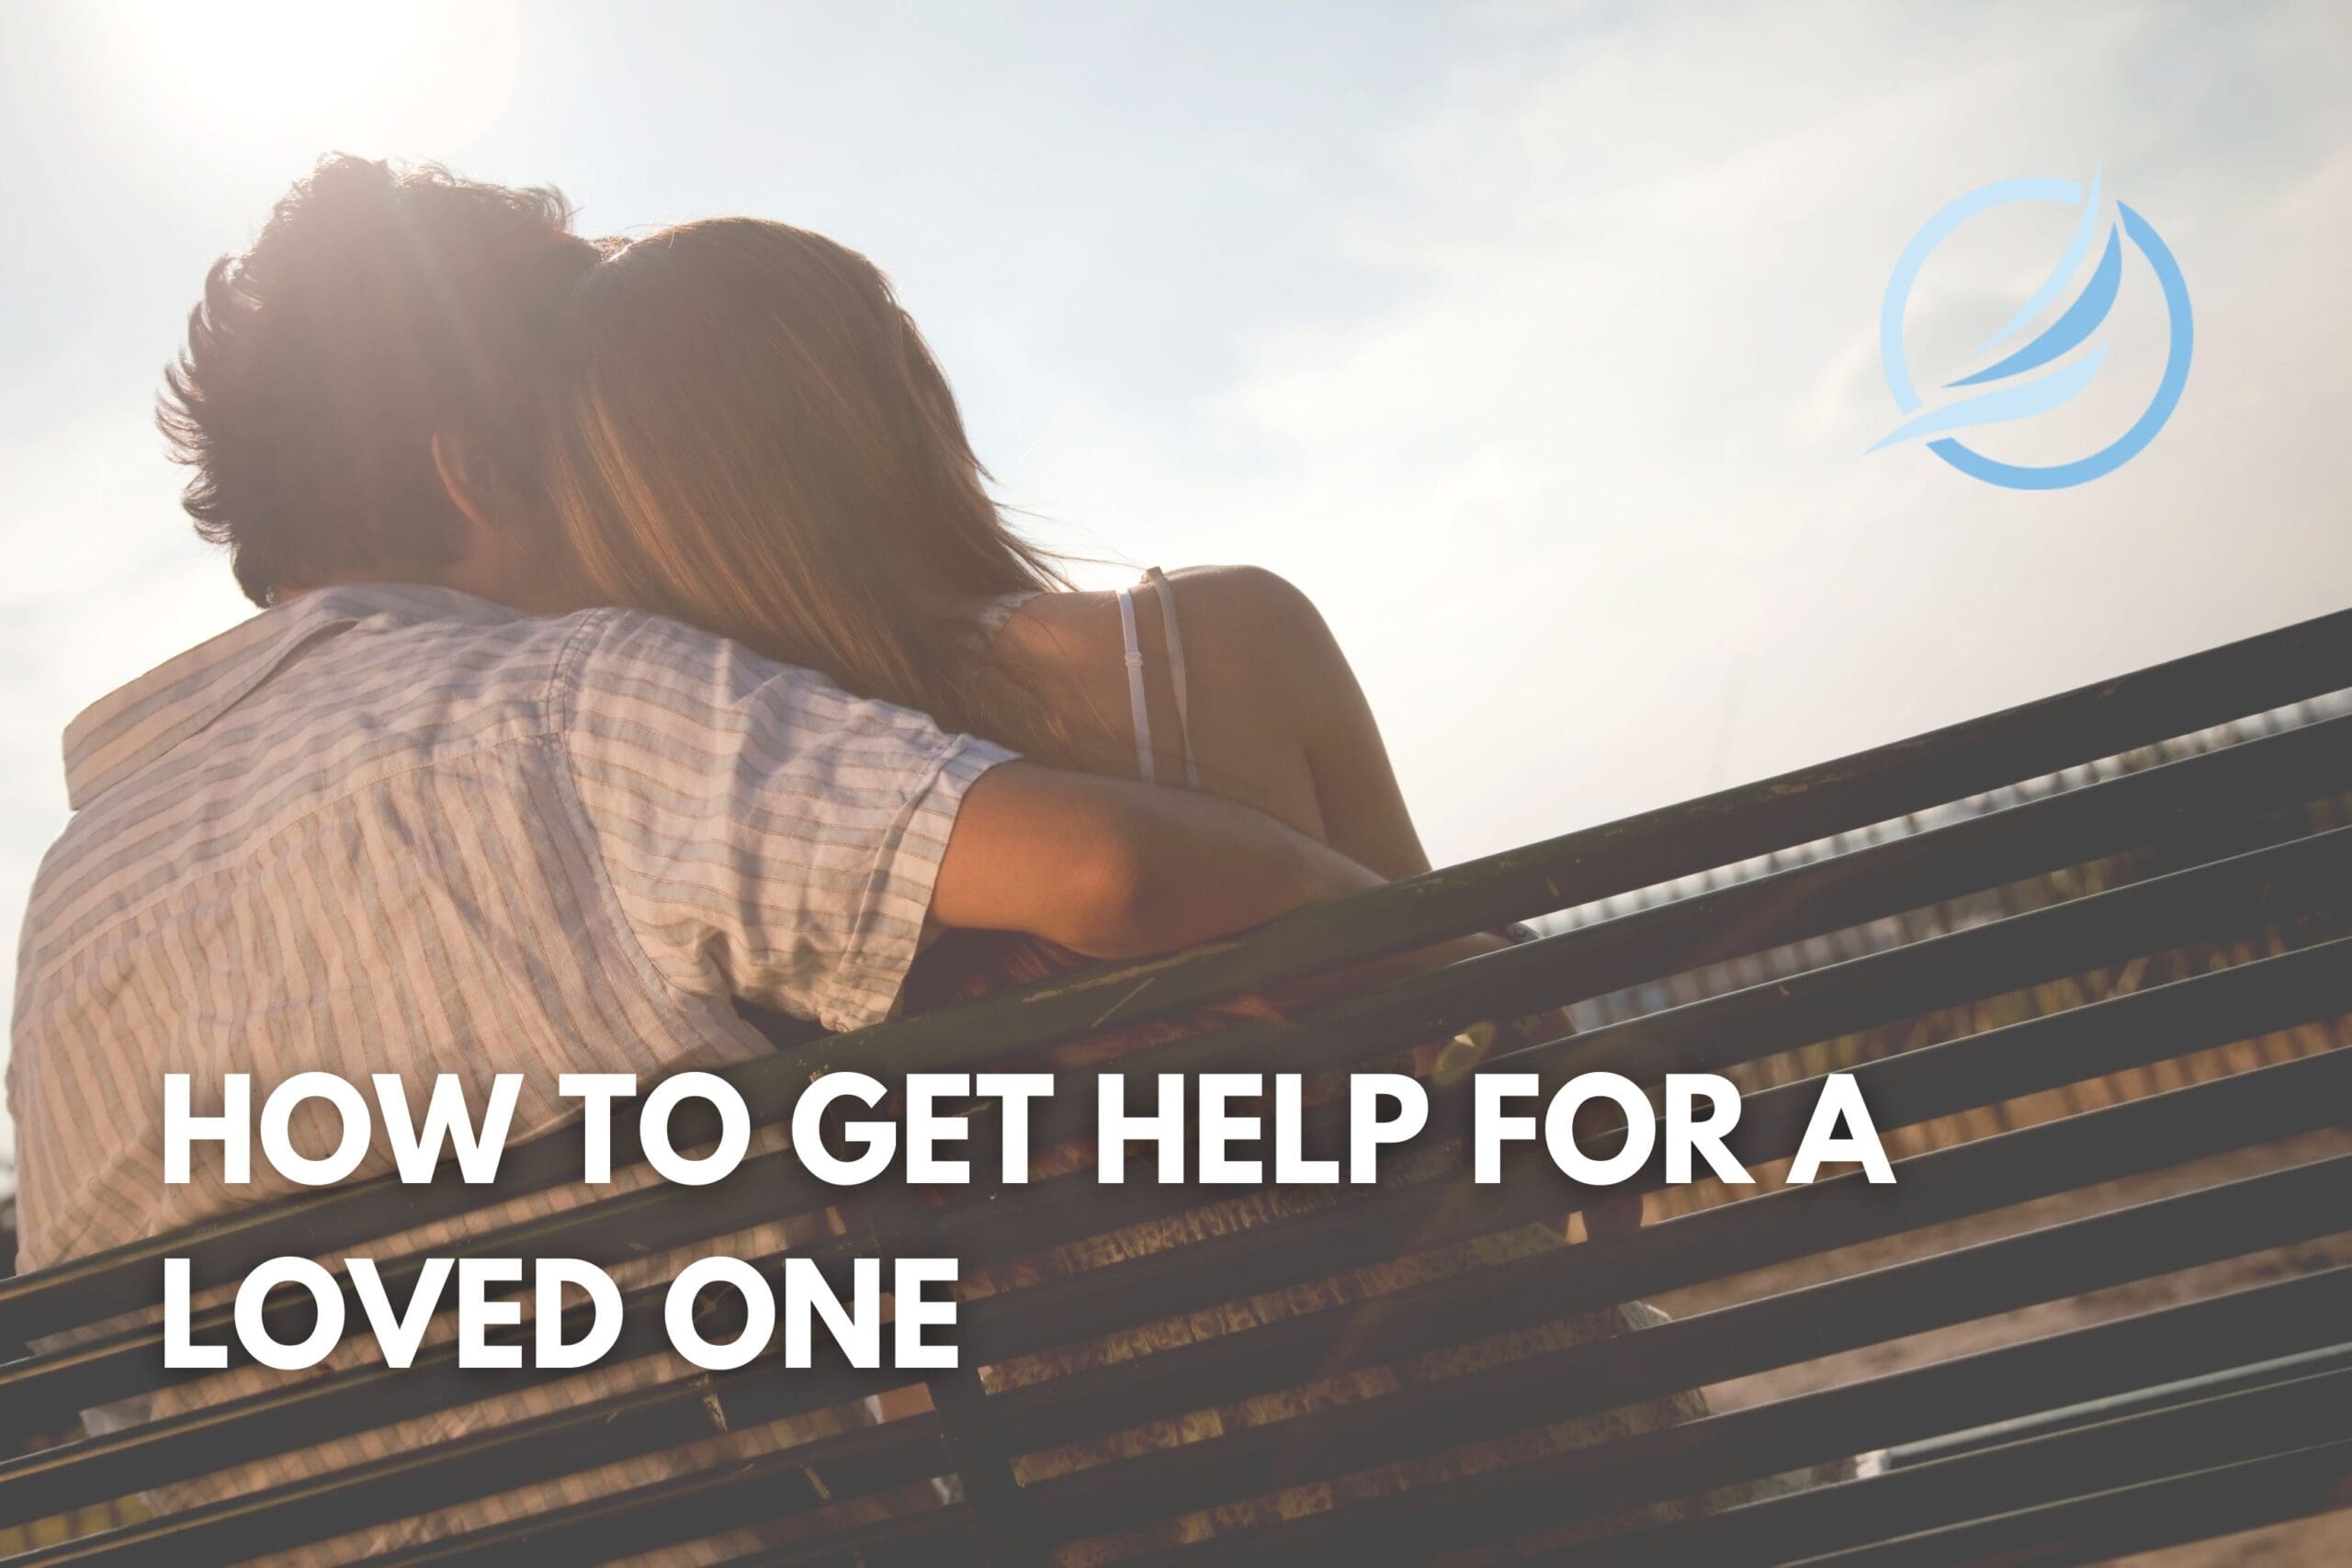 an image of two loved ones embracing after learning how to get help for a loved one in this comprehensive guide and how to helping someone with addiction.